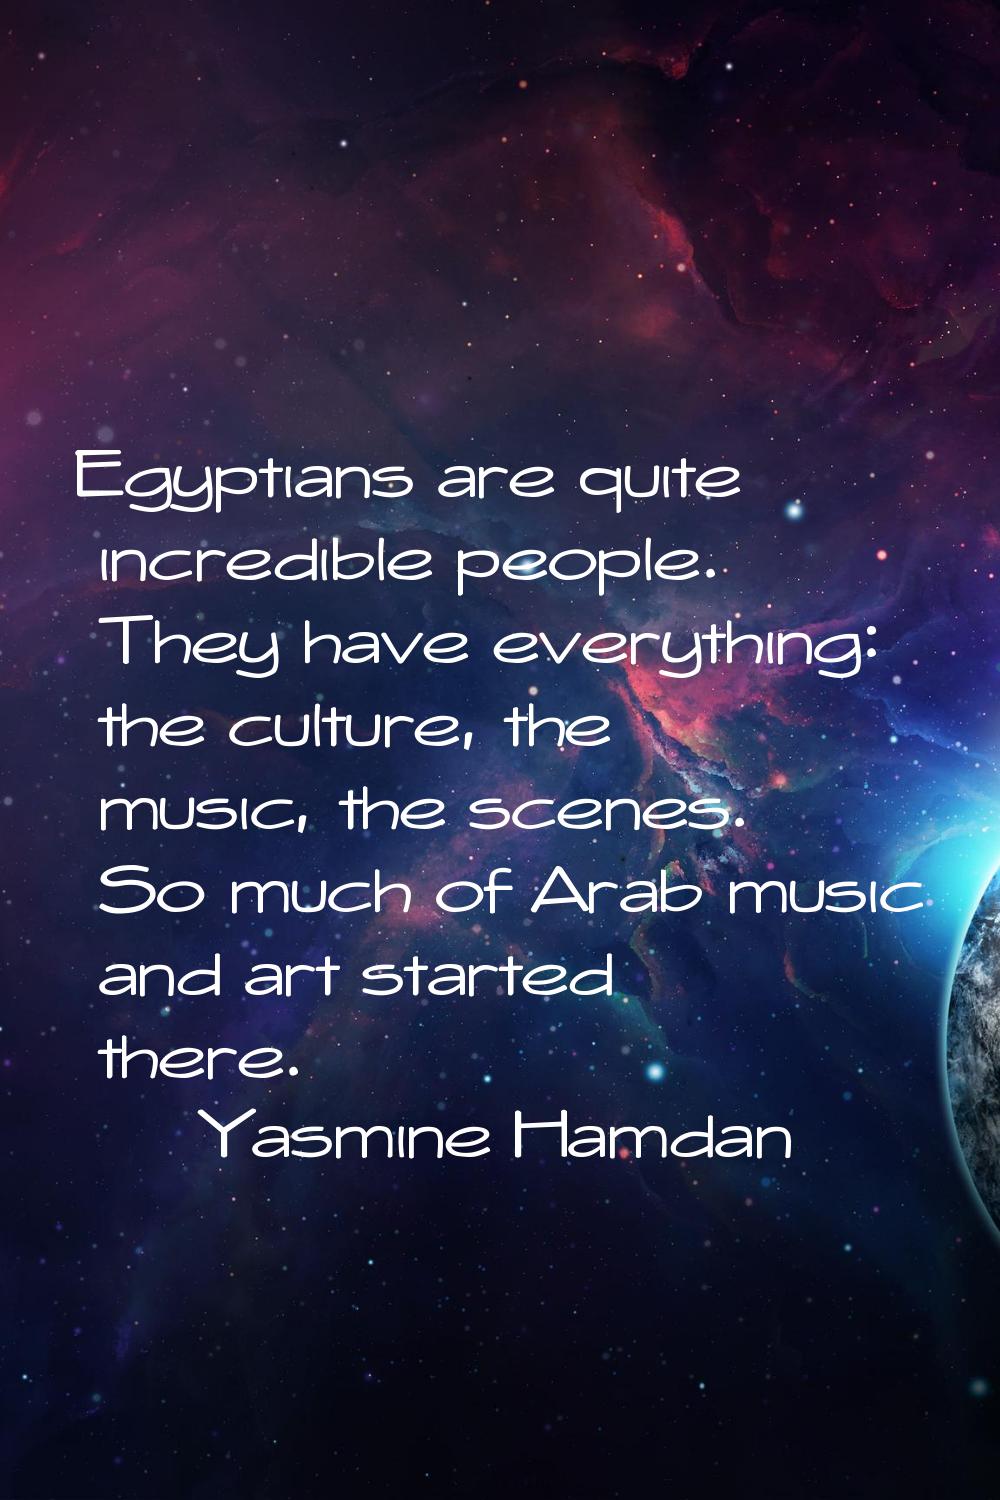 Egyptians are quite incredible people. They have everything: the culture, the music, the scenes. So